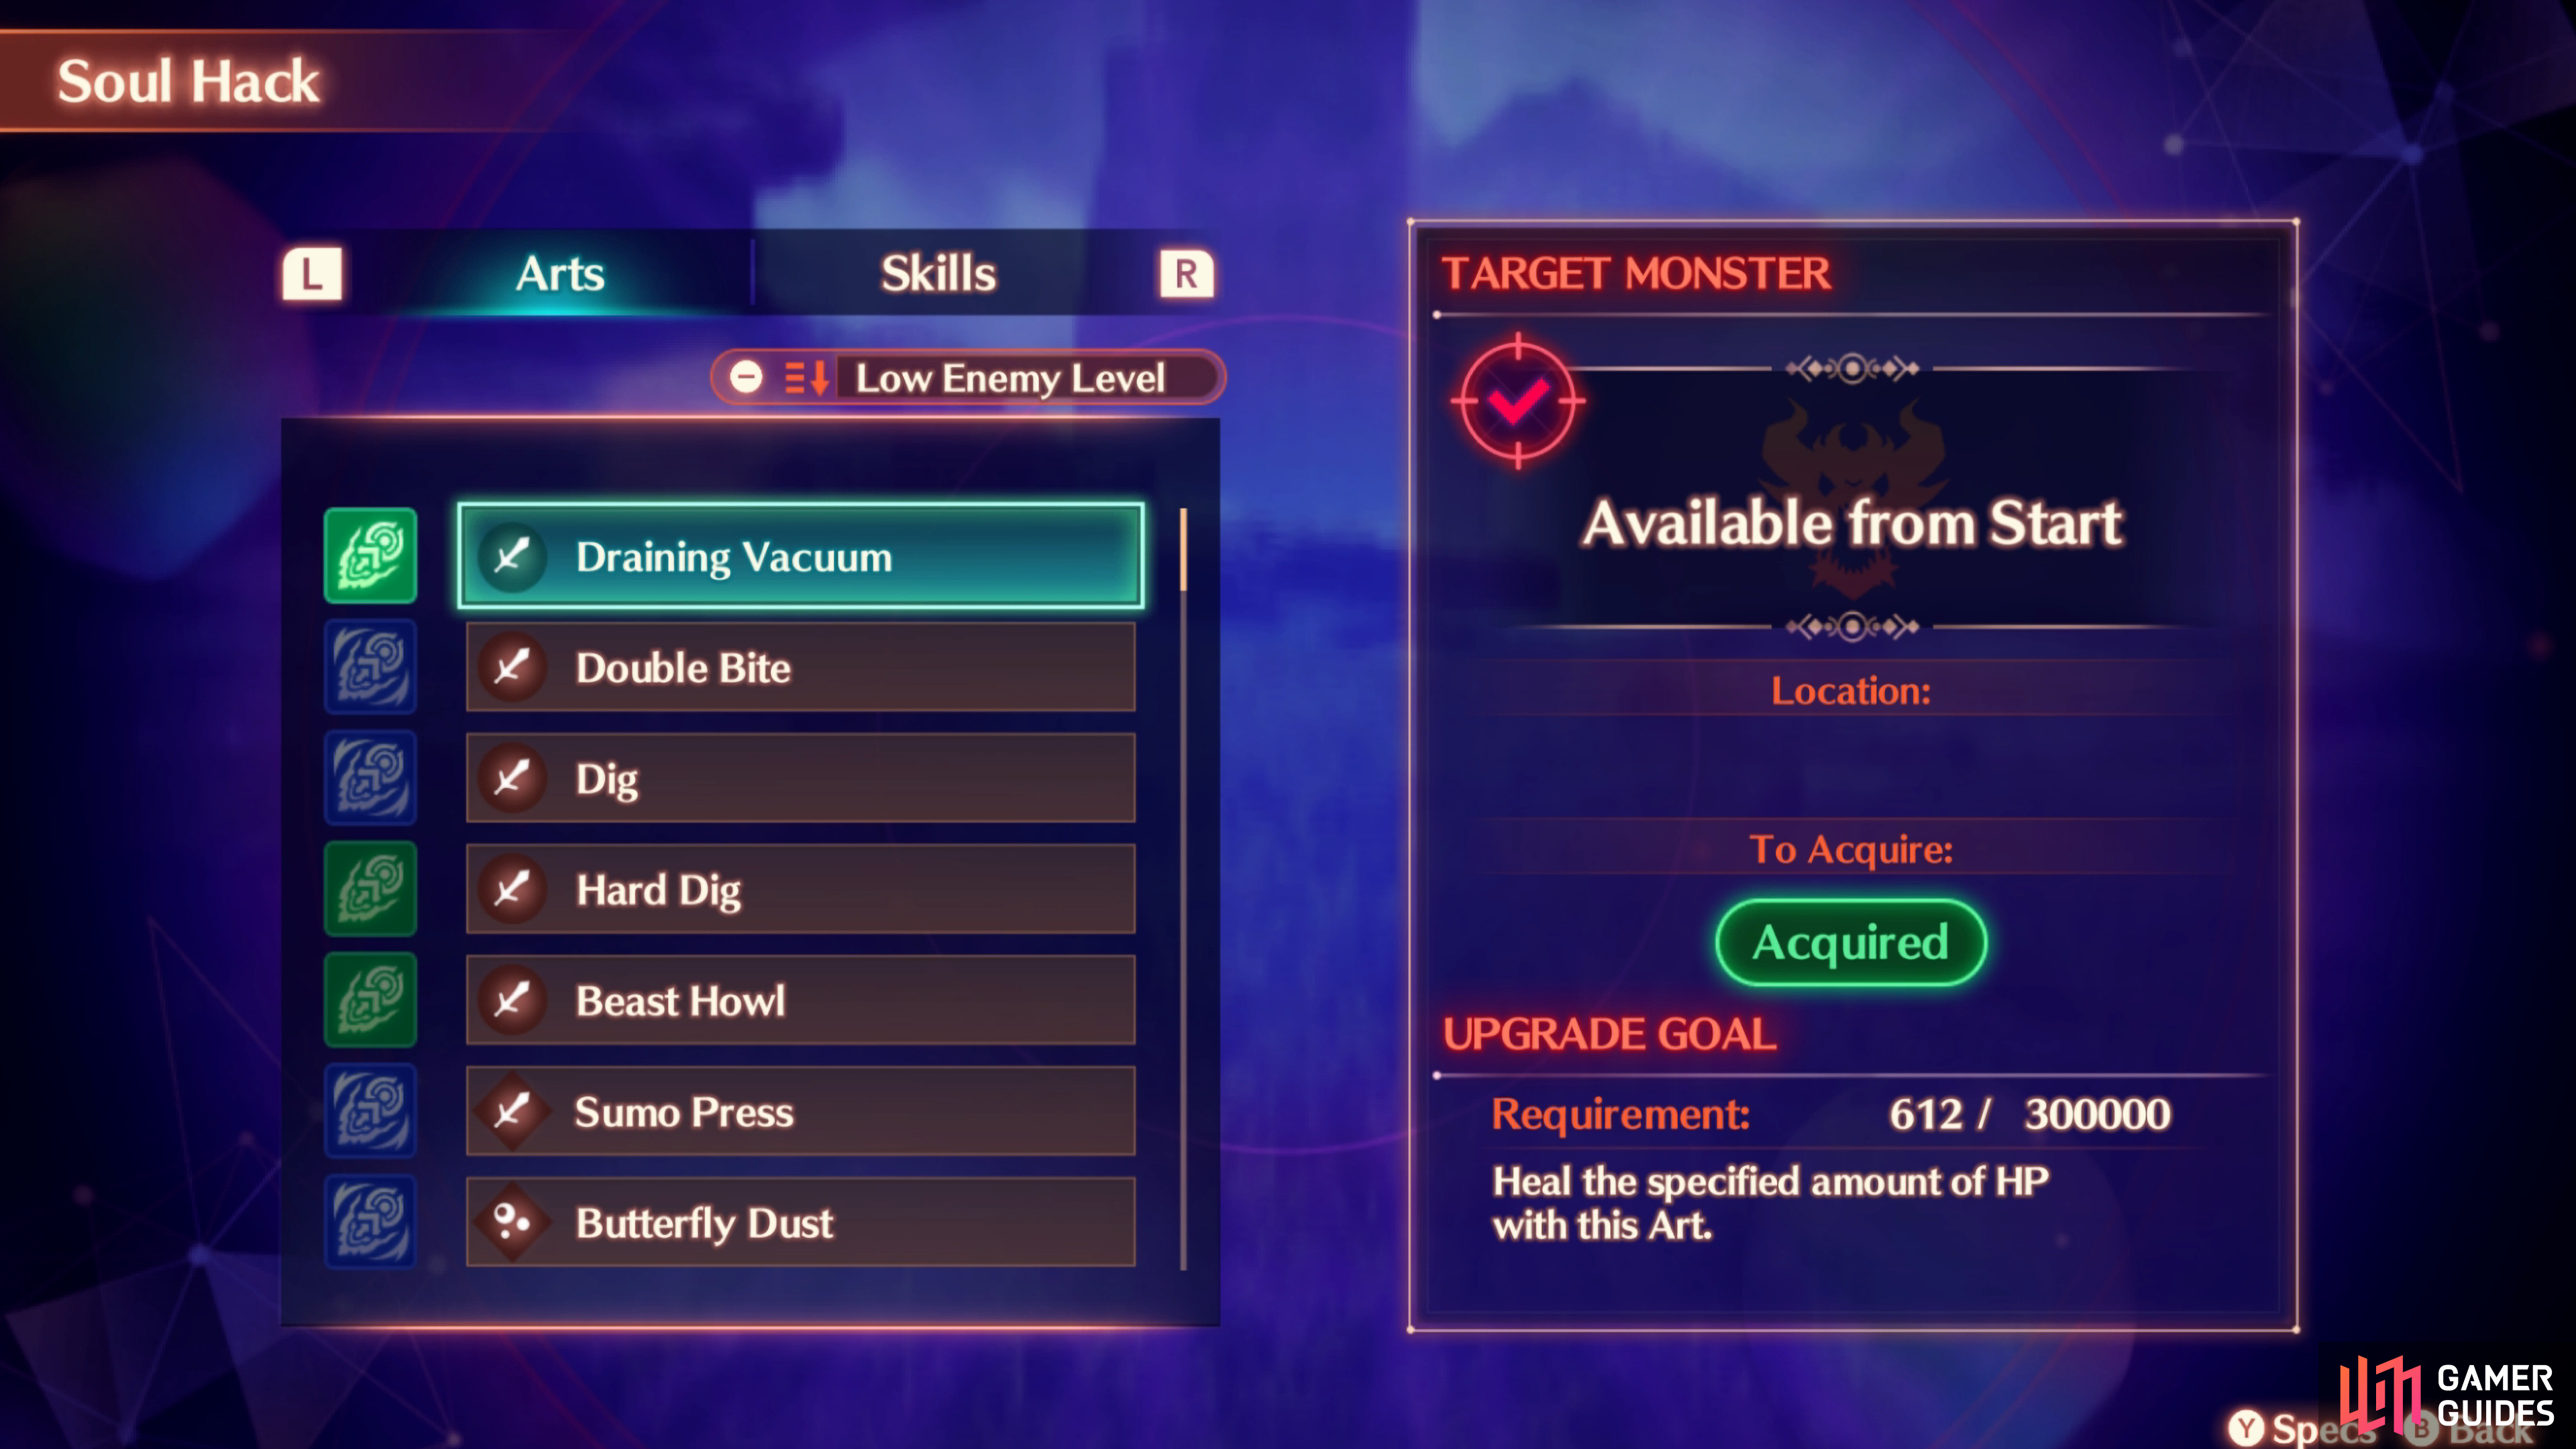 You can find what Arts youve acquired by going to the Heroes menu, and accessing the Soul Hack List by pressing Y.